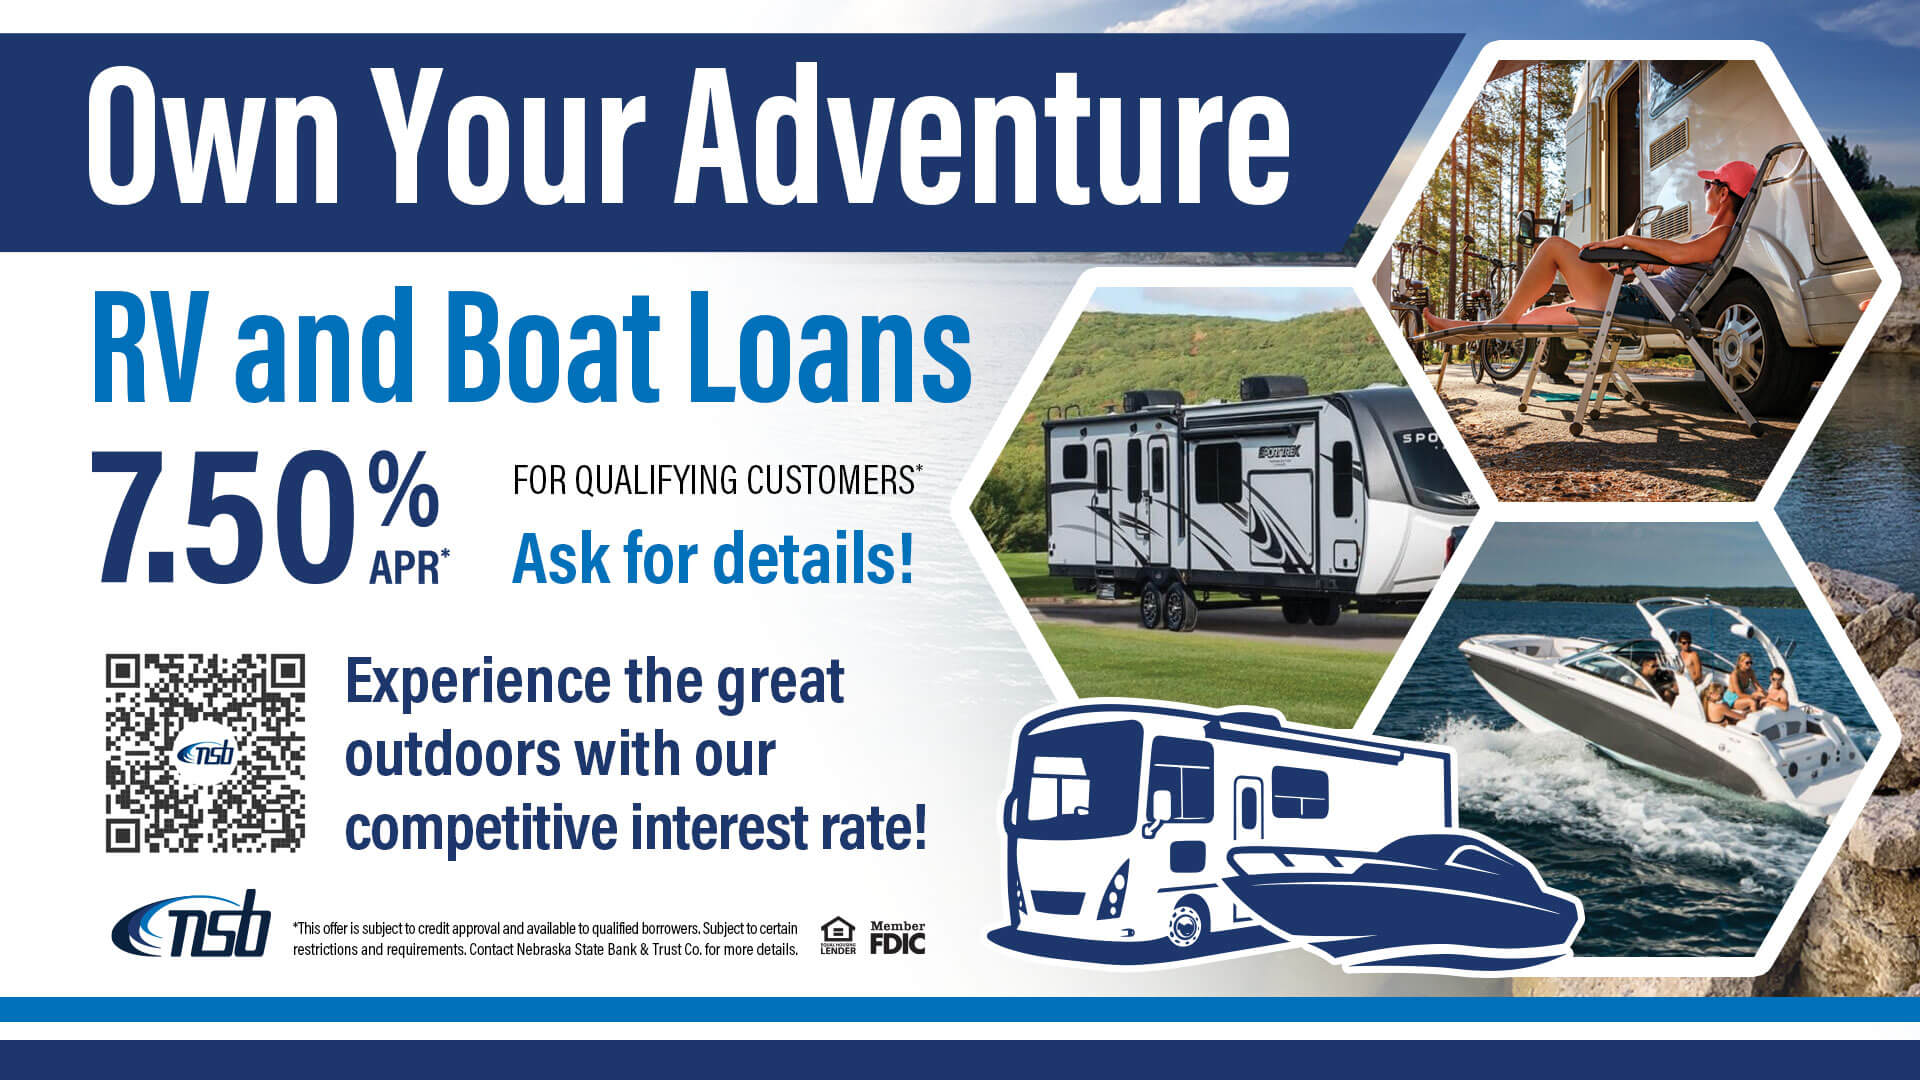 RV and Boat Loans